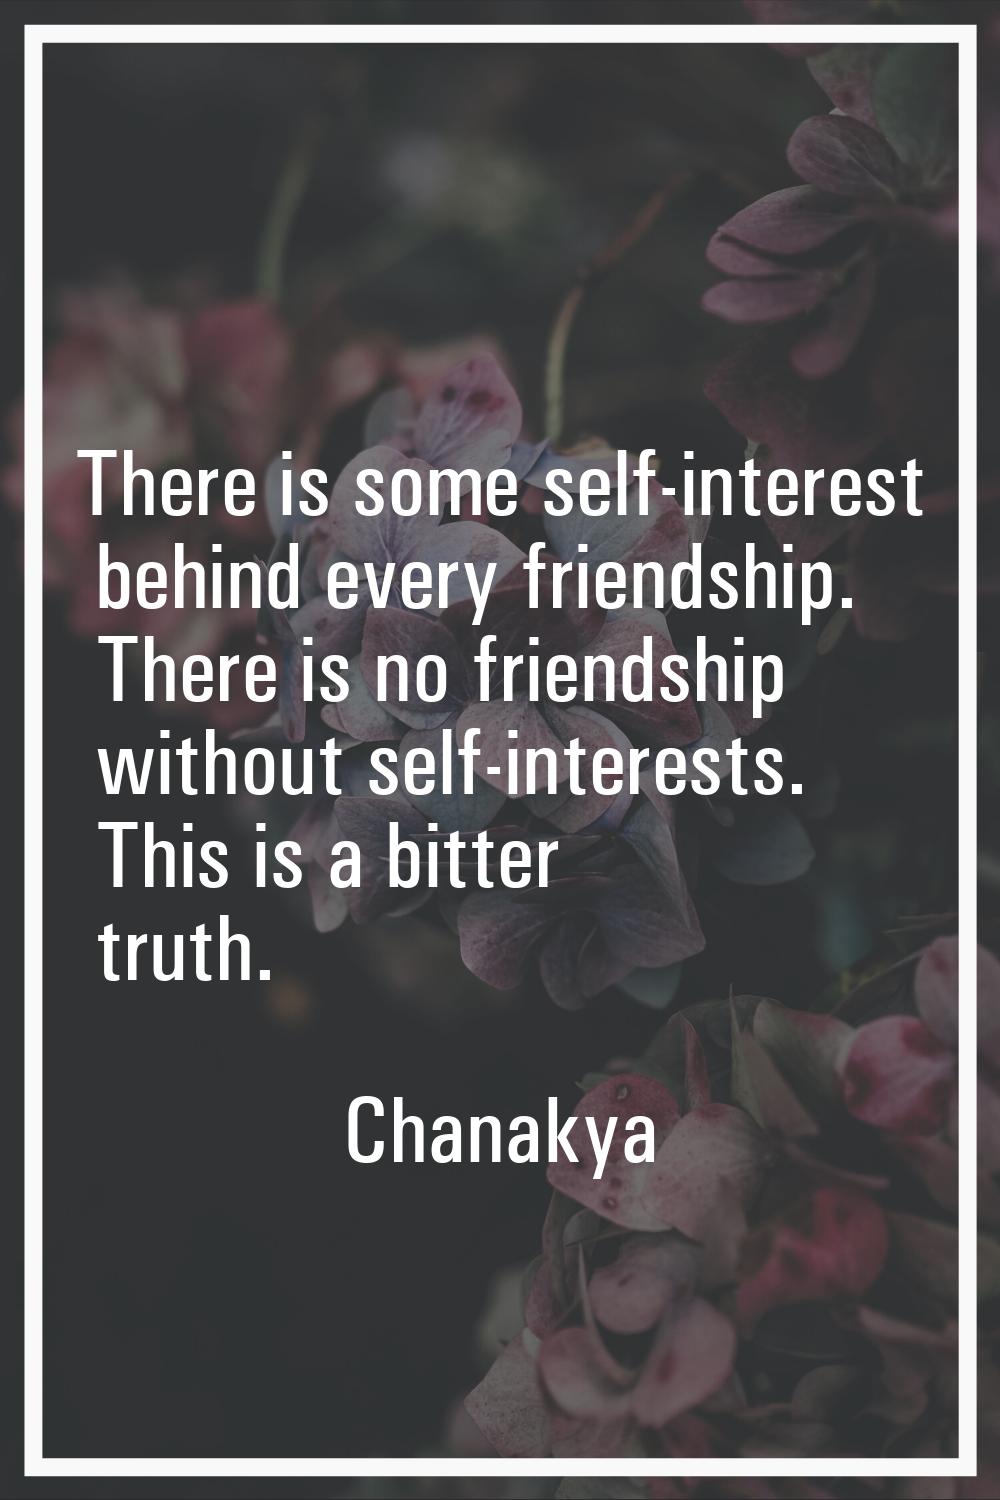 There is some self-interest behind every friendship. There is no friendship without self-interests.